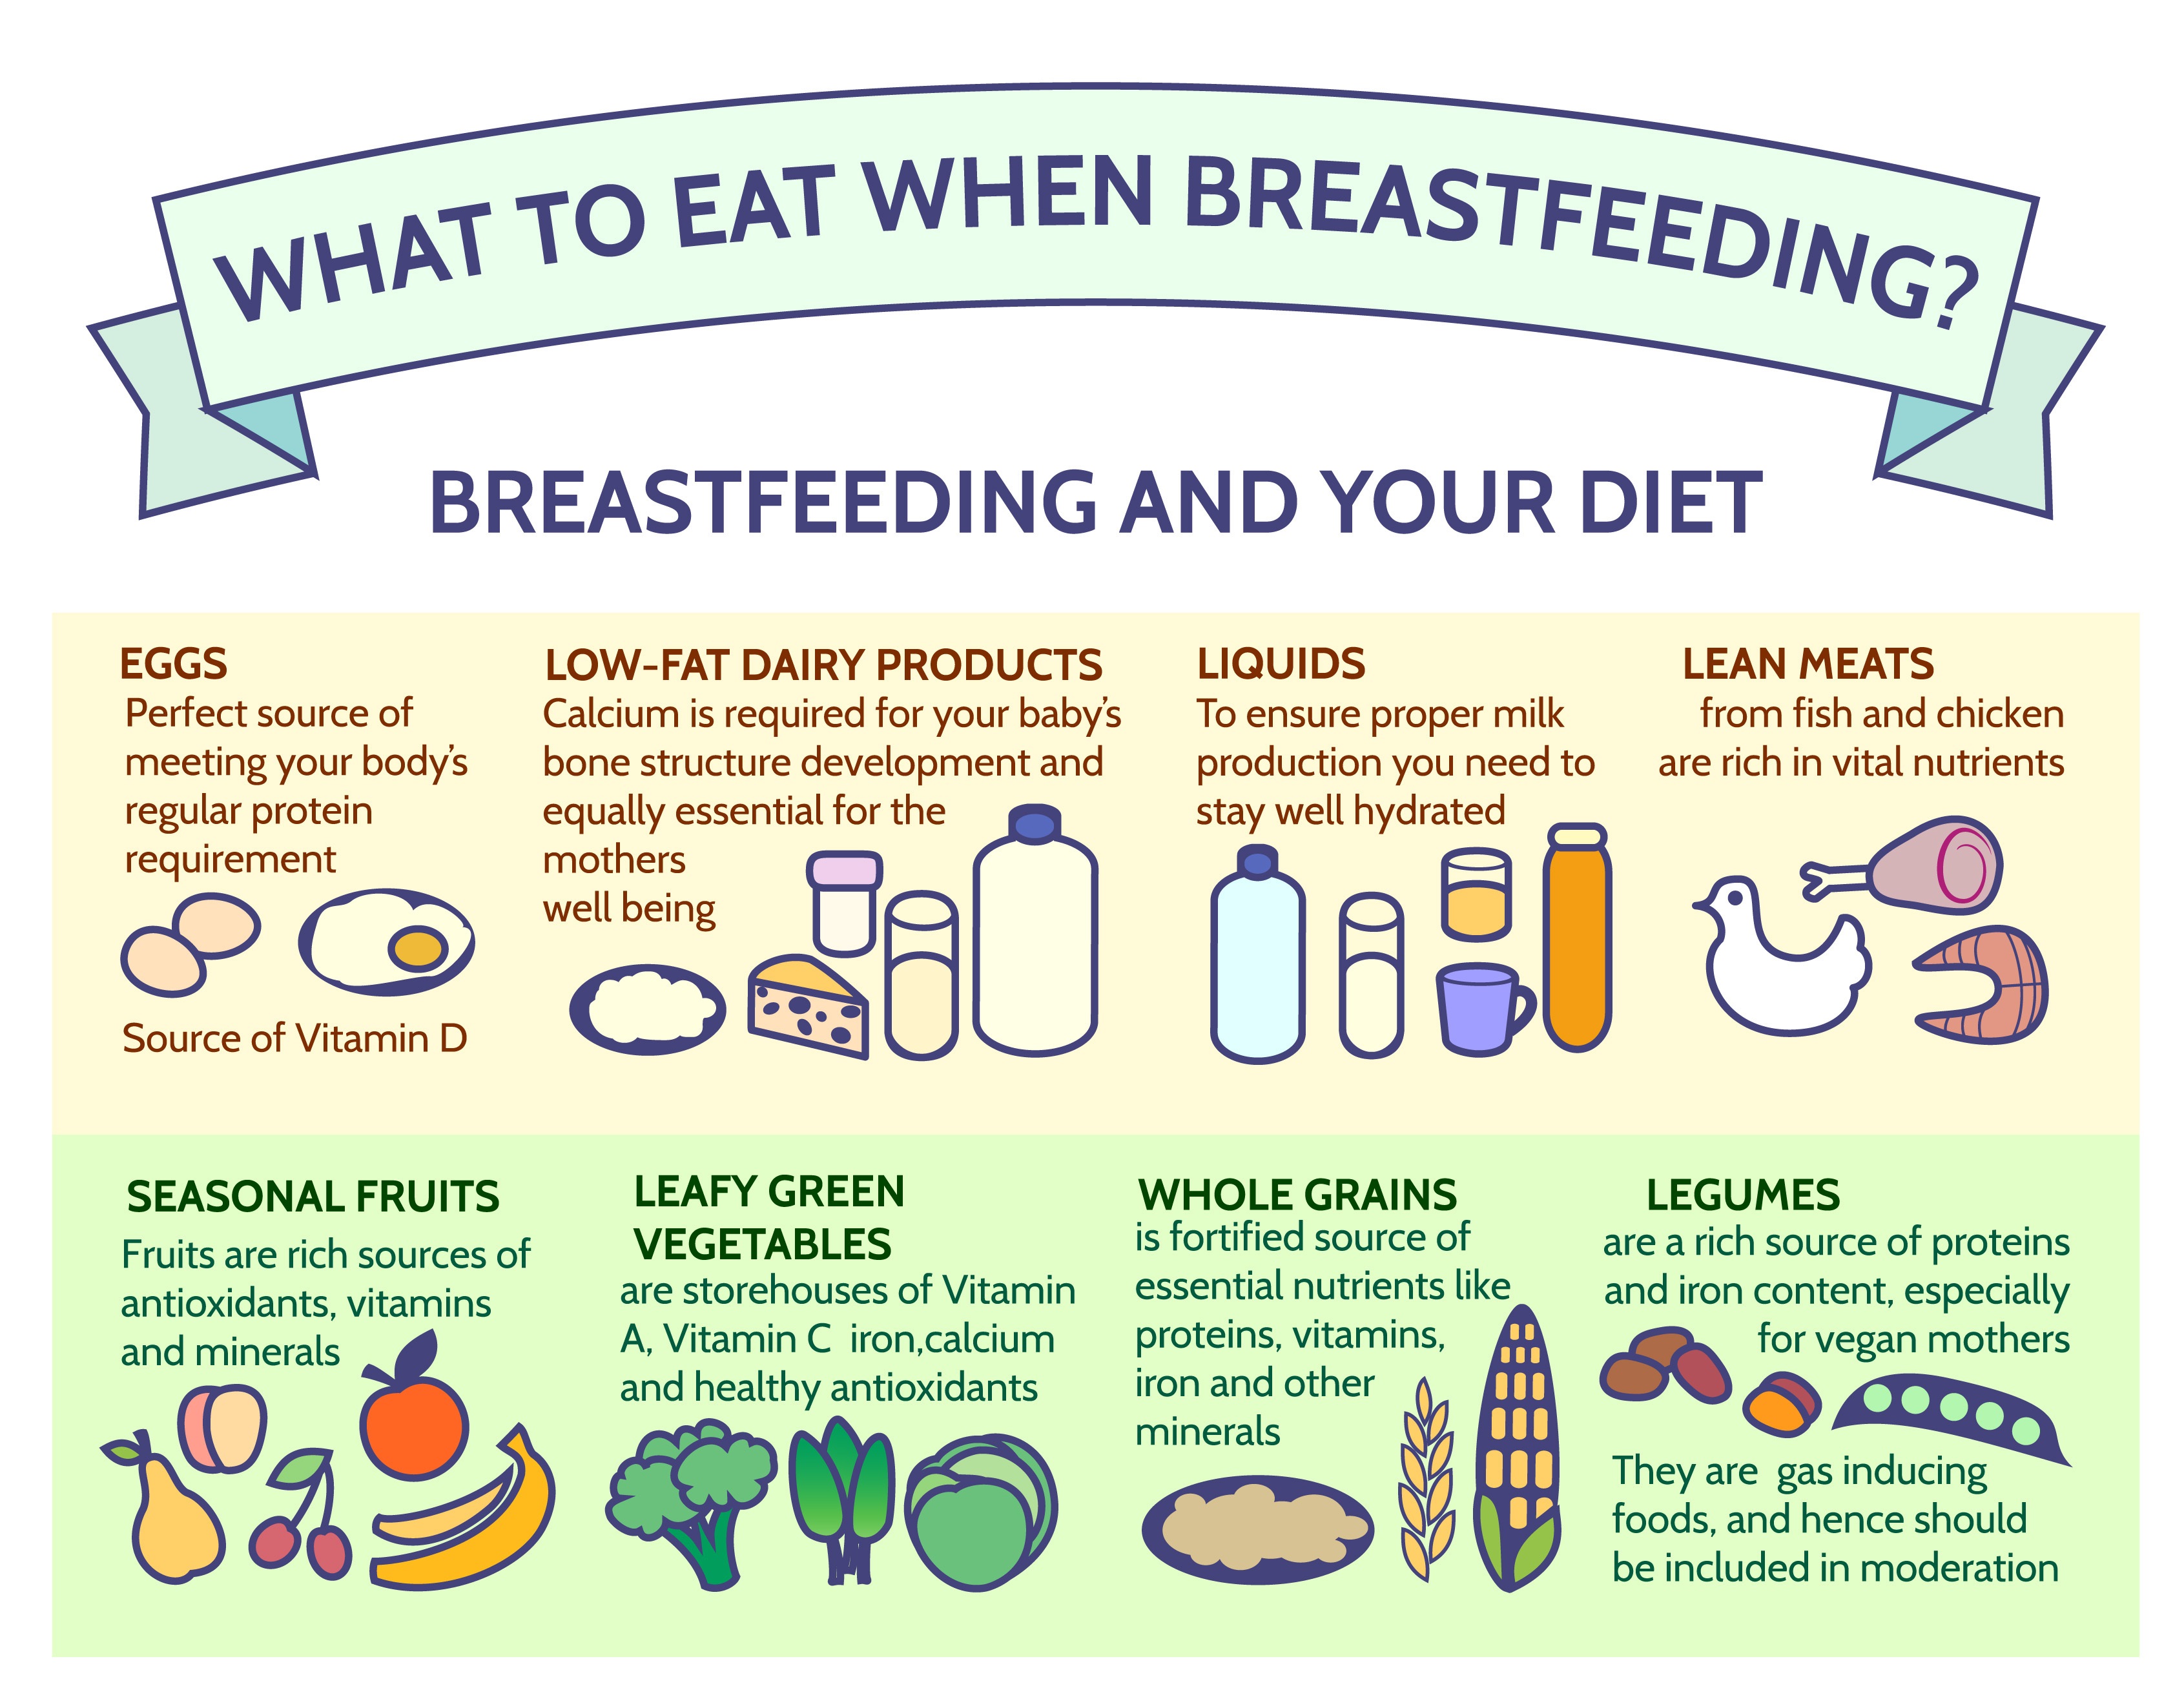 A balanced diet is important for breastfeeding mothers. Nursing mothers should drink sufficient water and have important nutrients. Doctors also recommend breastfeeding mothers to have certain supplement.